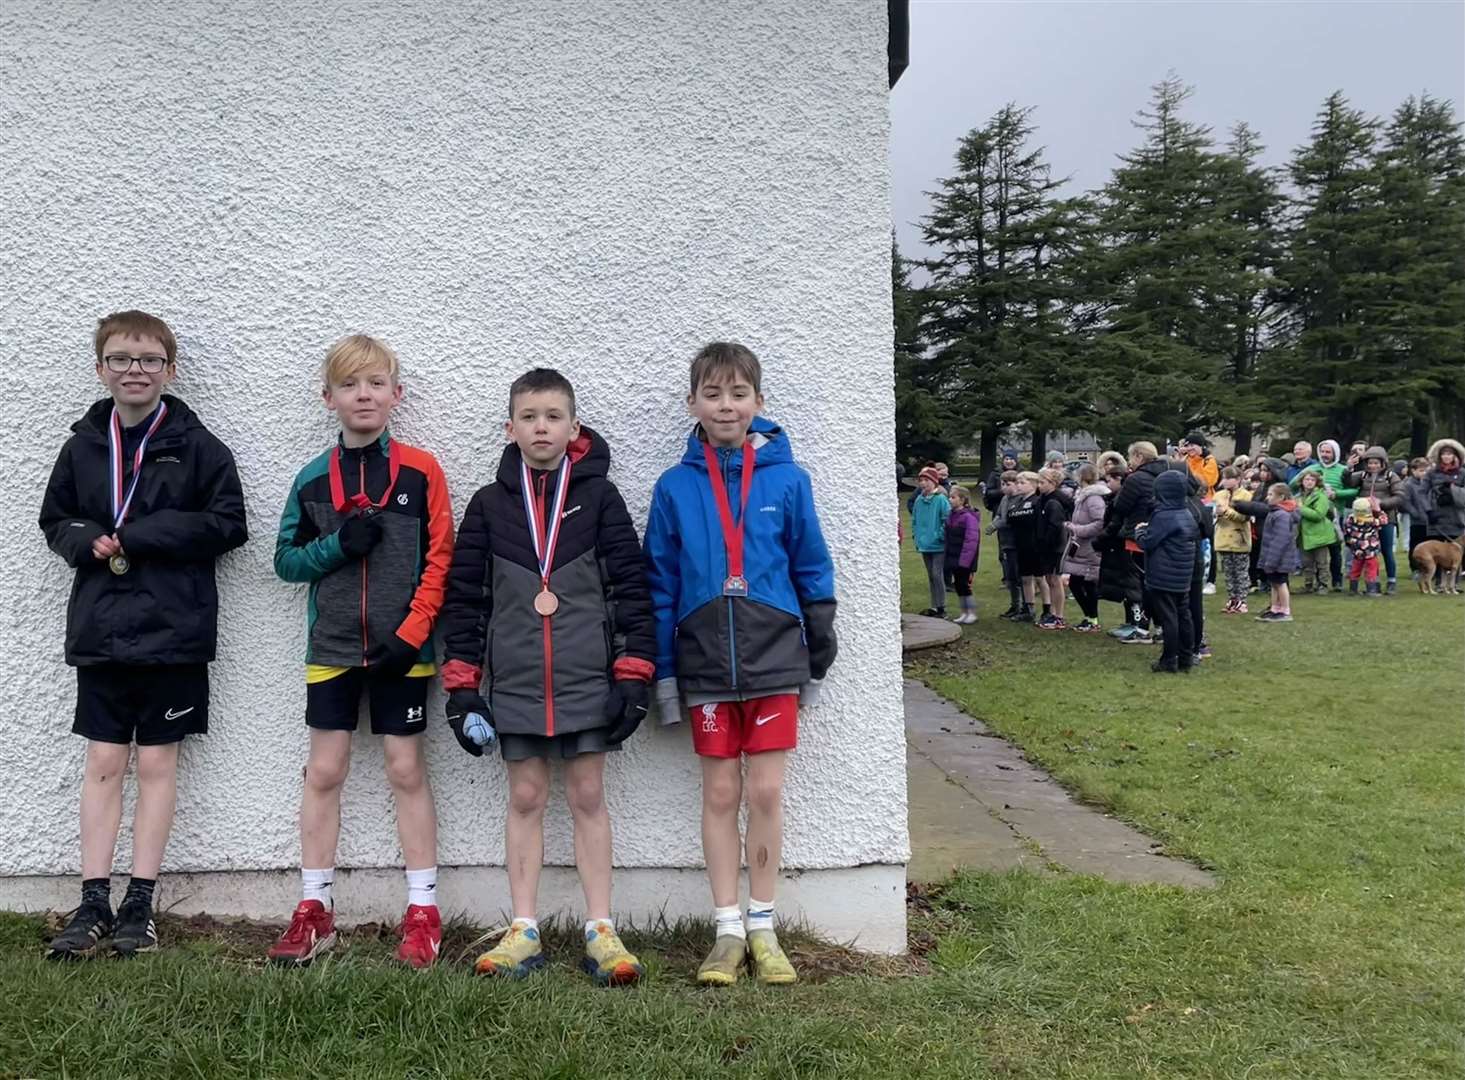 Callum Offer was 3rd in P4/5 boys, Logan Smith and Jesse Dye were equal second and Finlay Bichan was the winner.